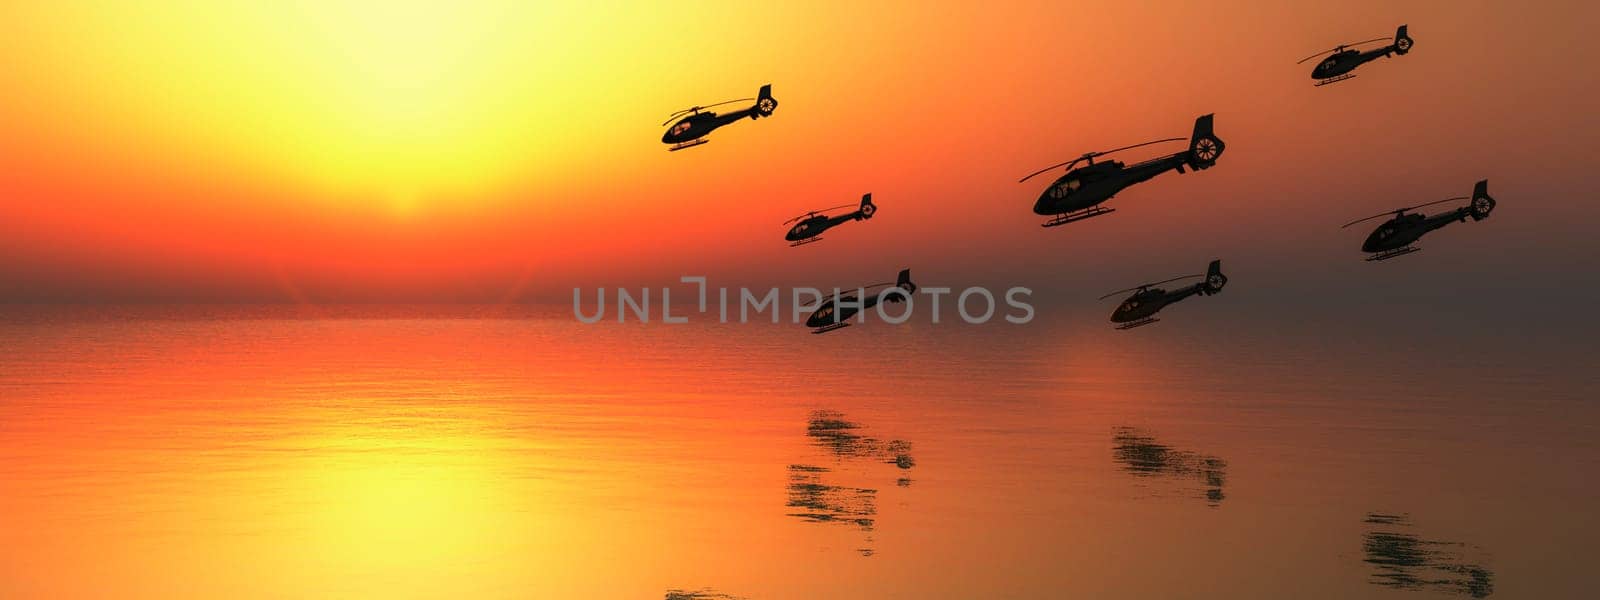 Multiple helicopters in silhouette against a captivating orange sunset reflecting on the ocean's surface